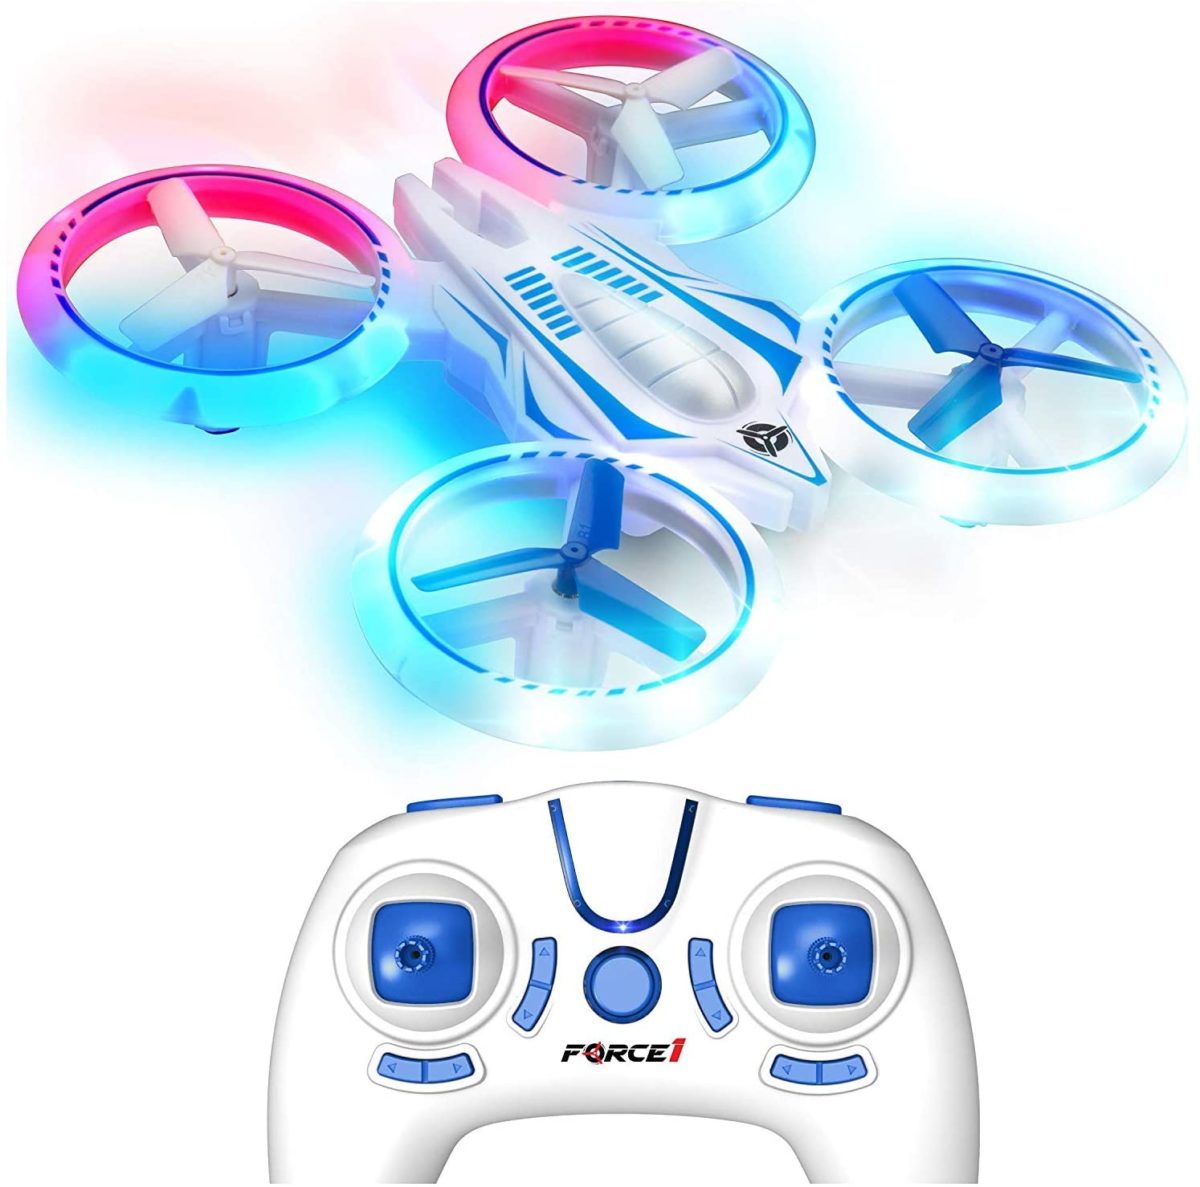 Force1 UFO 4000 LED Mini Drones for Kids - Top Toys and Gifts for Eight Year Old Boys 1